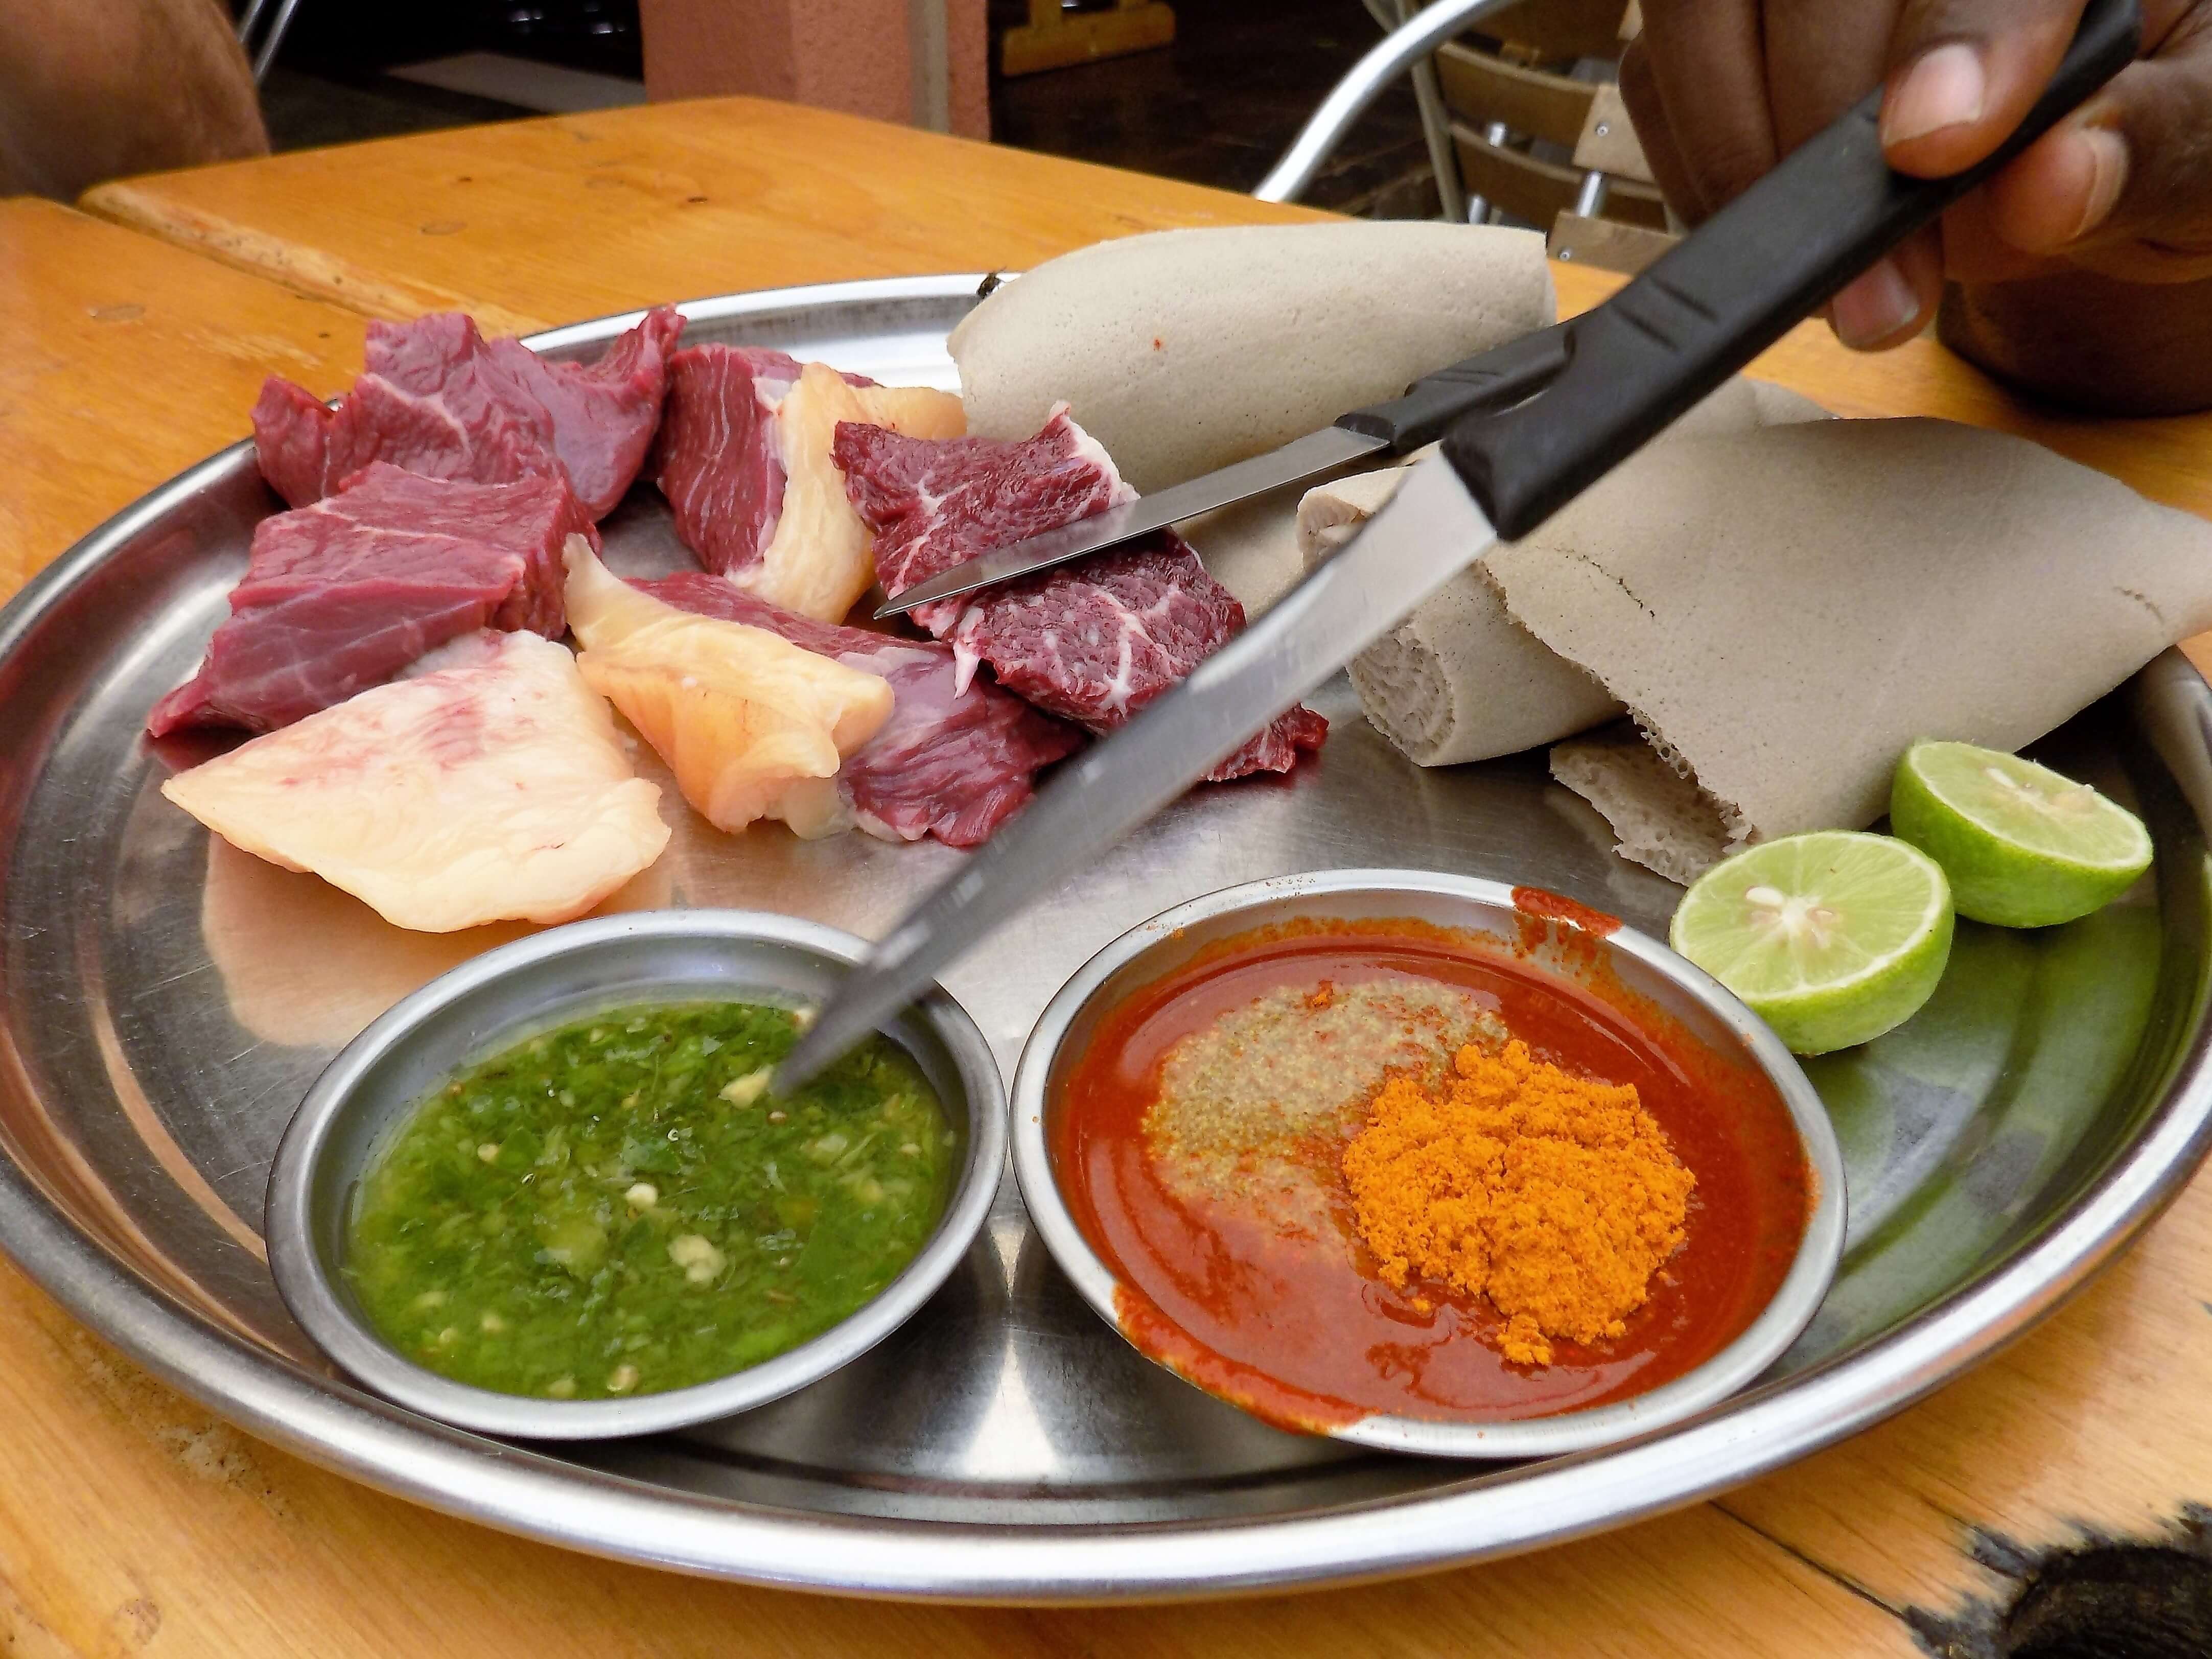 This photo shows a plate of raw beef, injera, limes and chilli sauces